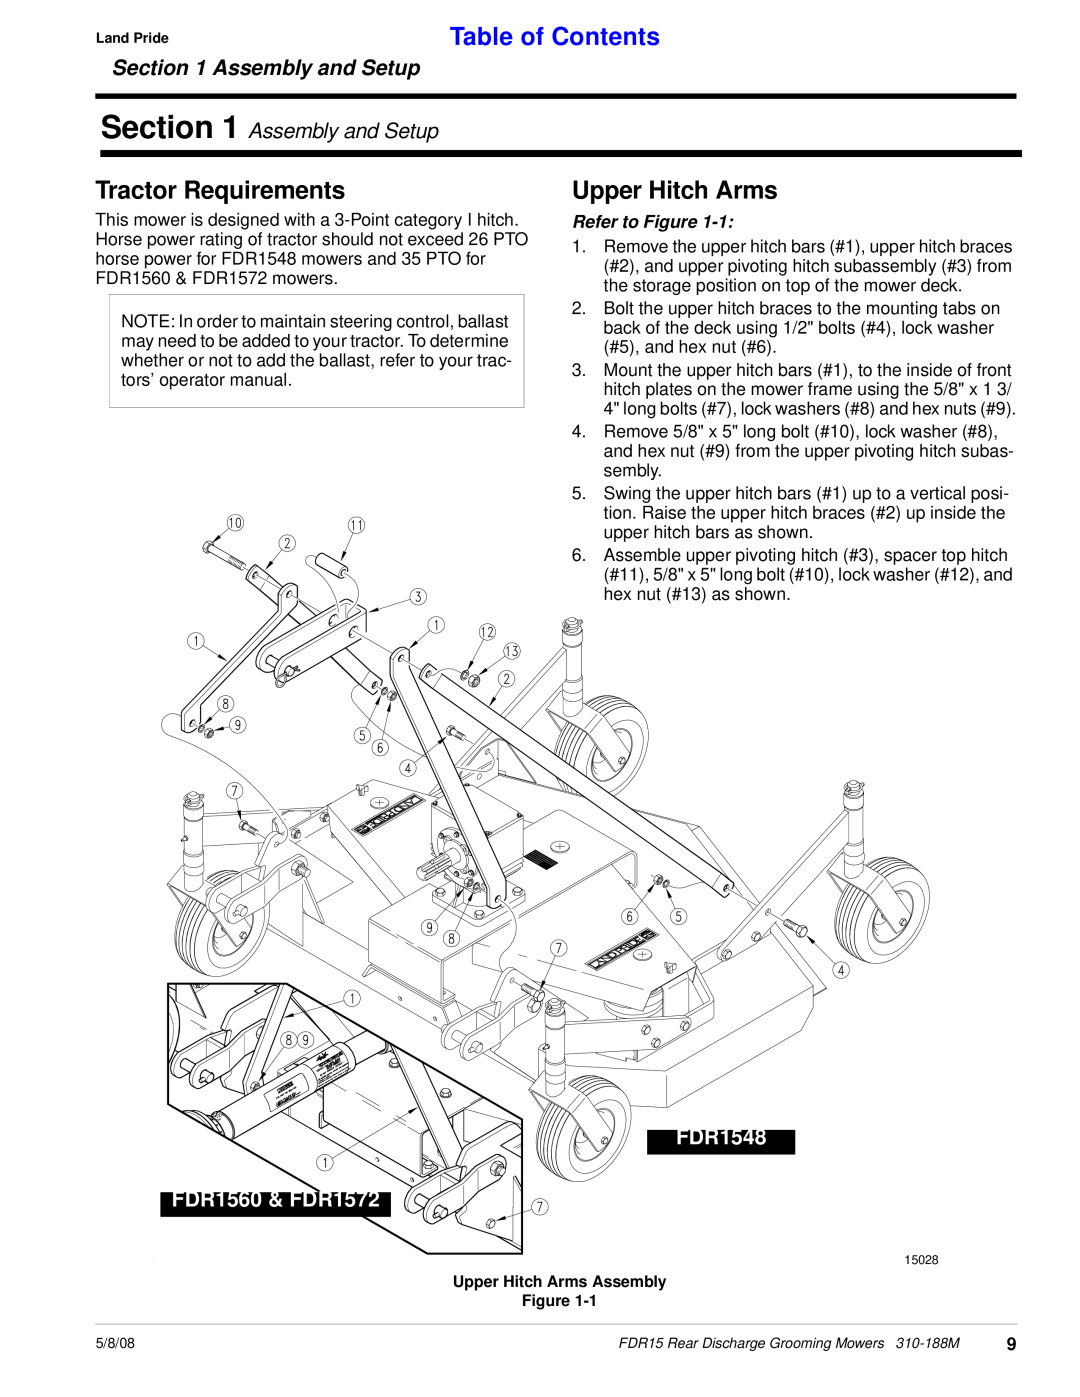 Land Pride FDR15 manual Tractor Requirements, Upper Hitch Arms, Assembly and Setup, Refer to Figure, Table of Contents 